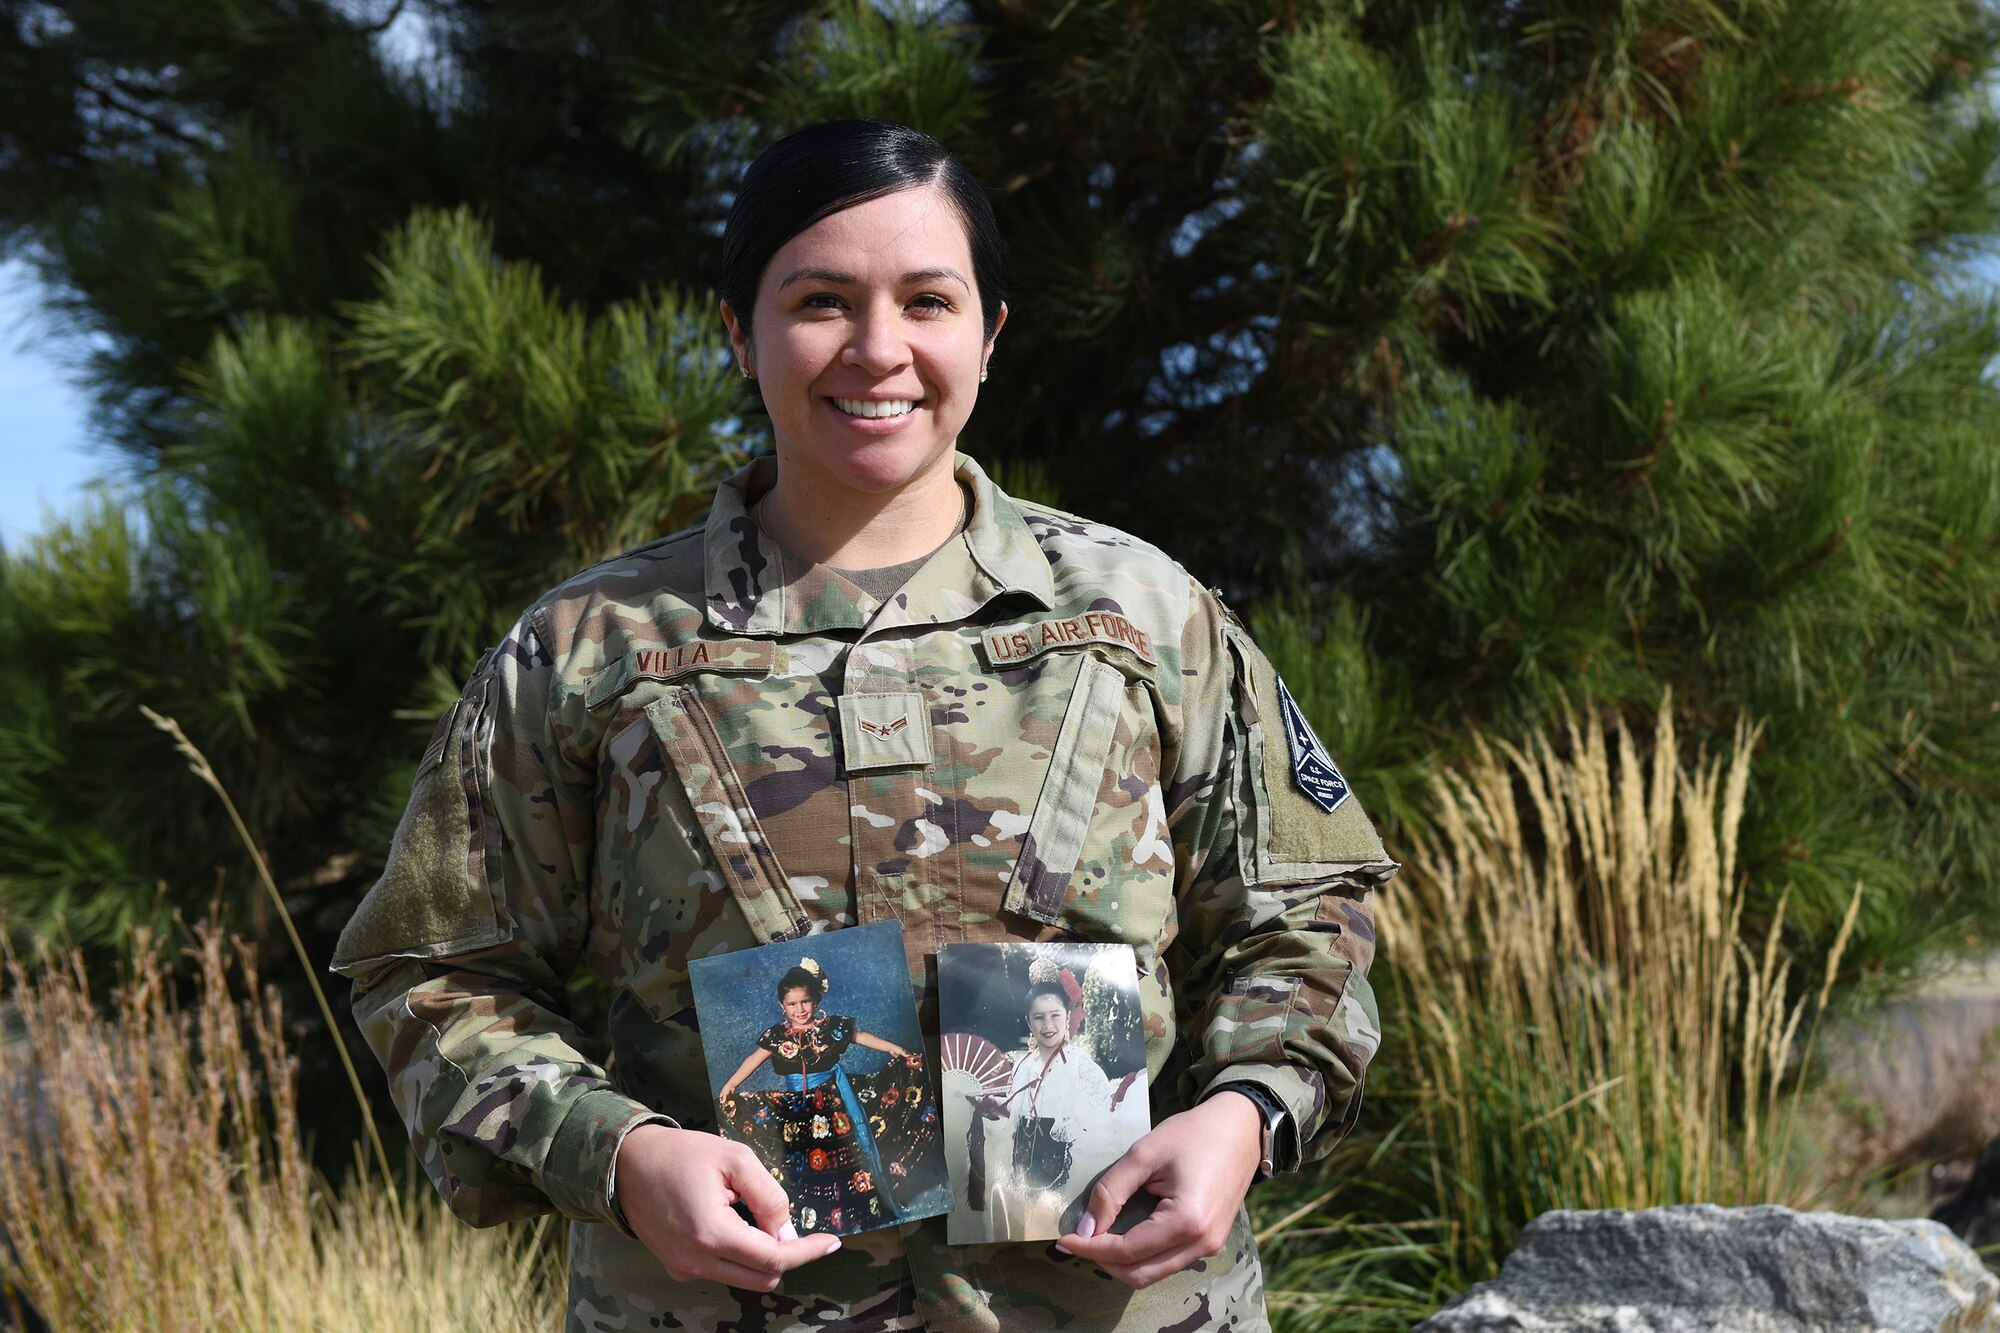 Airman 1st Class Malanie Villa, Buckley Garrison military justice paralegal, poses for a photo on Buckley Air Force Base, Colo. Villa lived in San Antonio her whole life before joining the military in 2019. While living in San Antonio, she participated in Folklorico dance for 19 years to teach her more about Hispanic culture from various regions of Mexico. (U.S. Space Force photo by Airman 1st Class Haley N. Blevins)